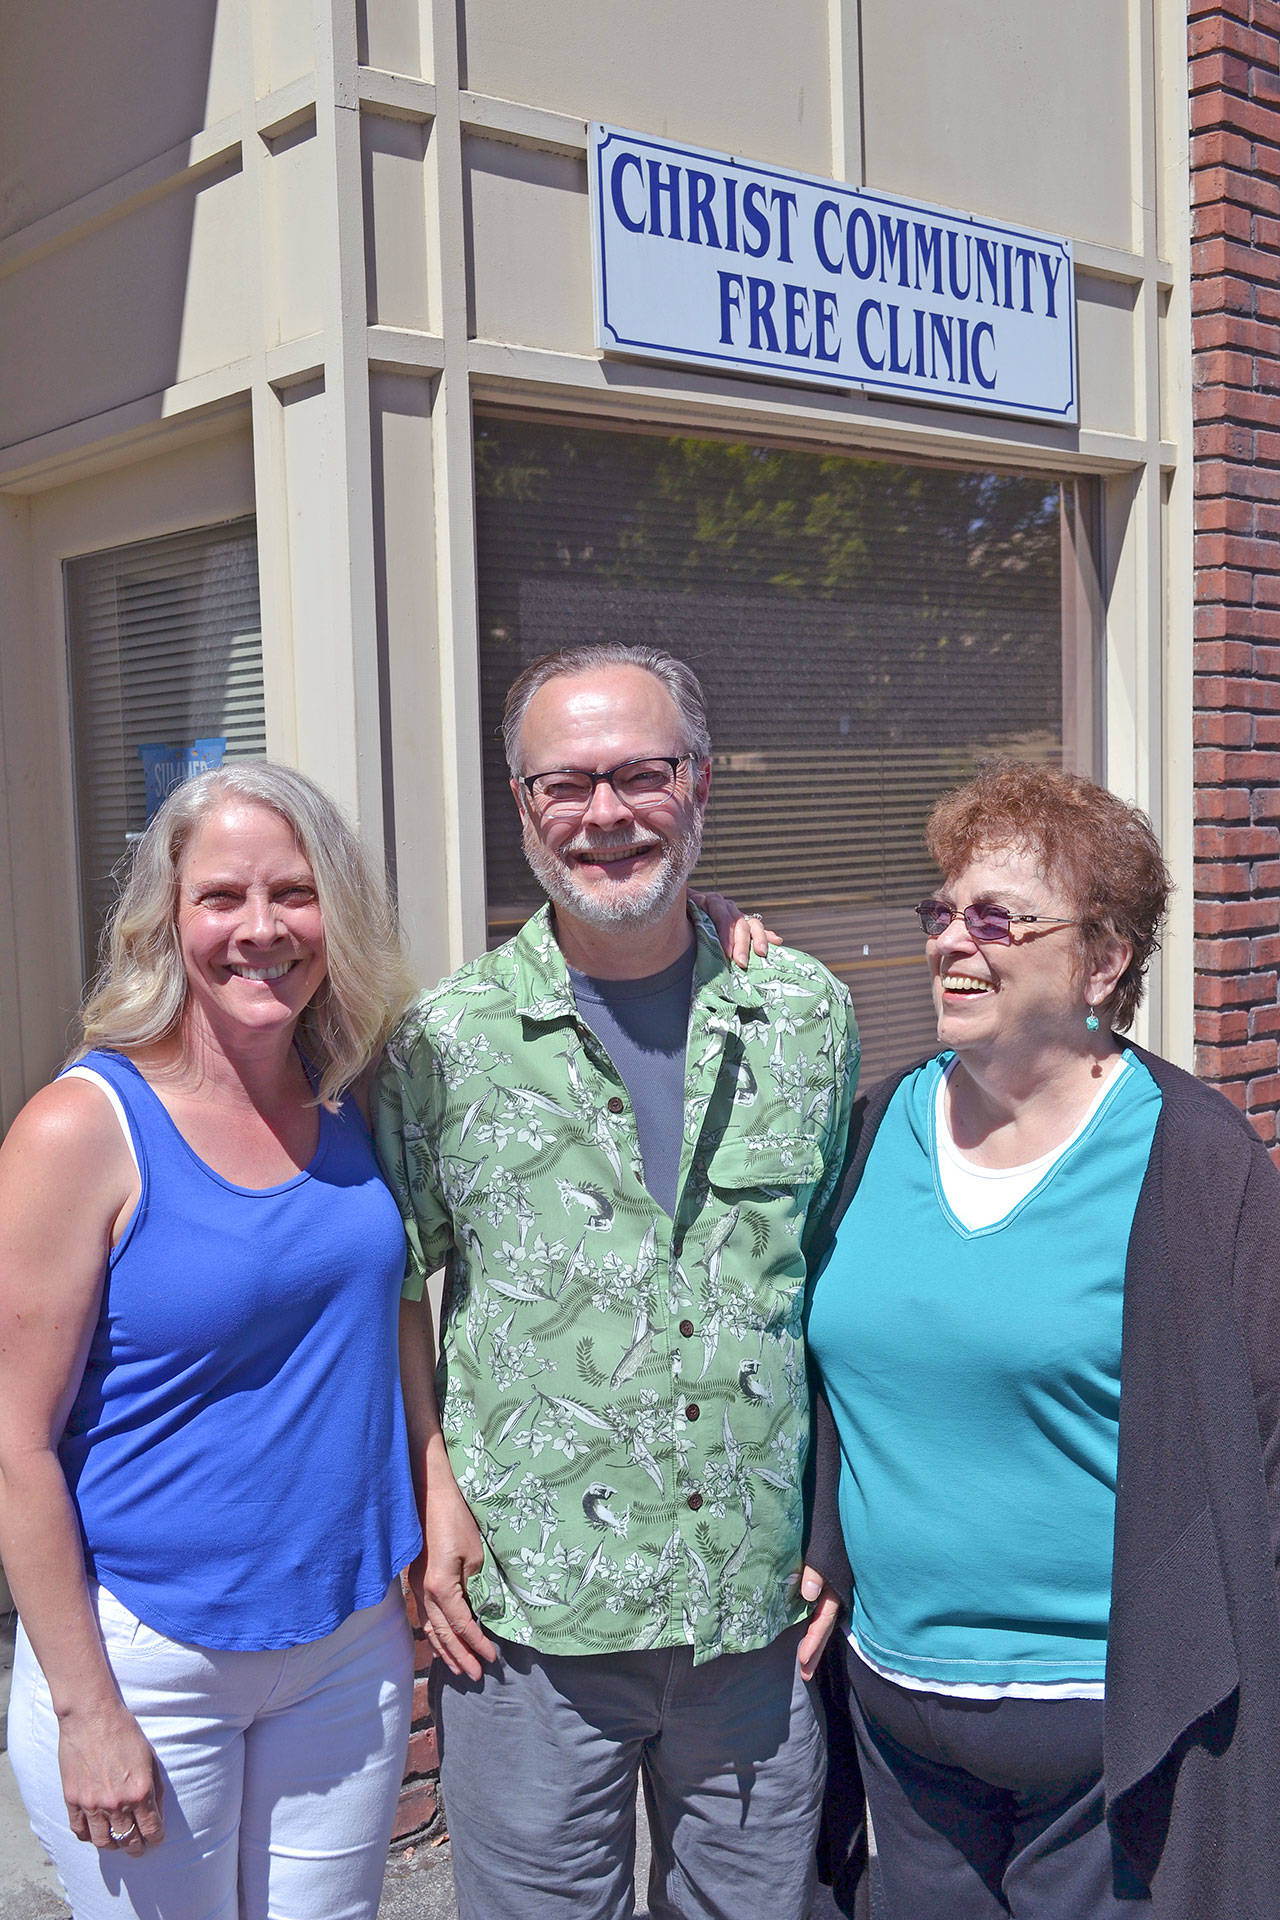 Looking for volunteer doctors, dentists, nurses, hygienists and assistants to help out at Christ Community Free Clinic at 1 A St. NW are from left, Dental Coordinator Judy Bluhm, Board Member Jeff Johnson and Executive Director Ginny Gannon. ROBERT WHALE, Auburn Reporter